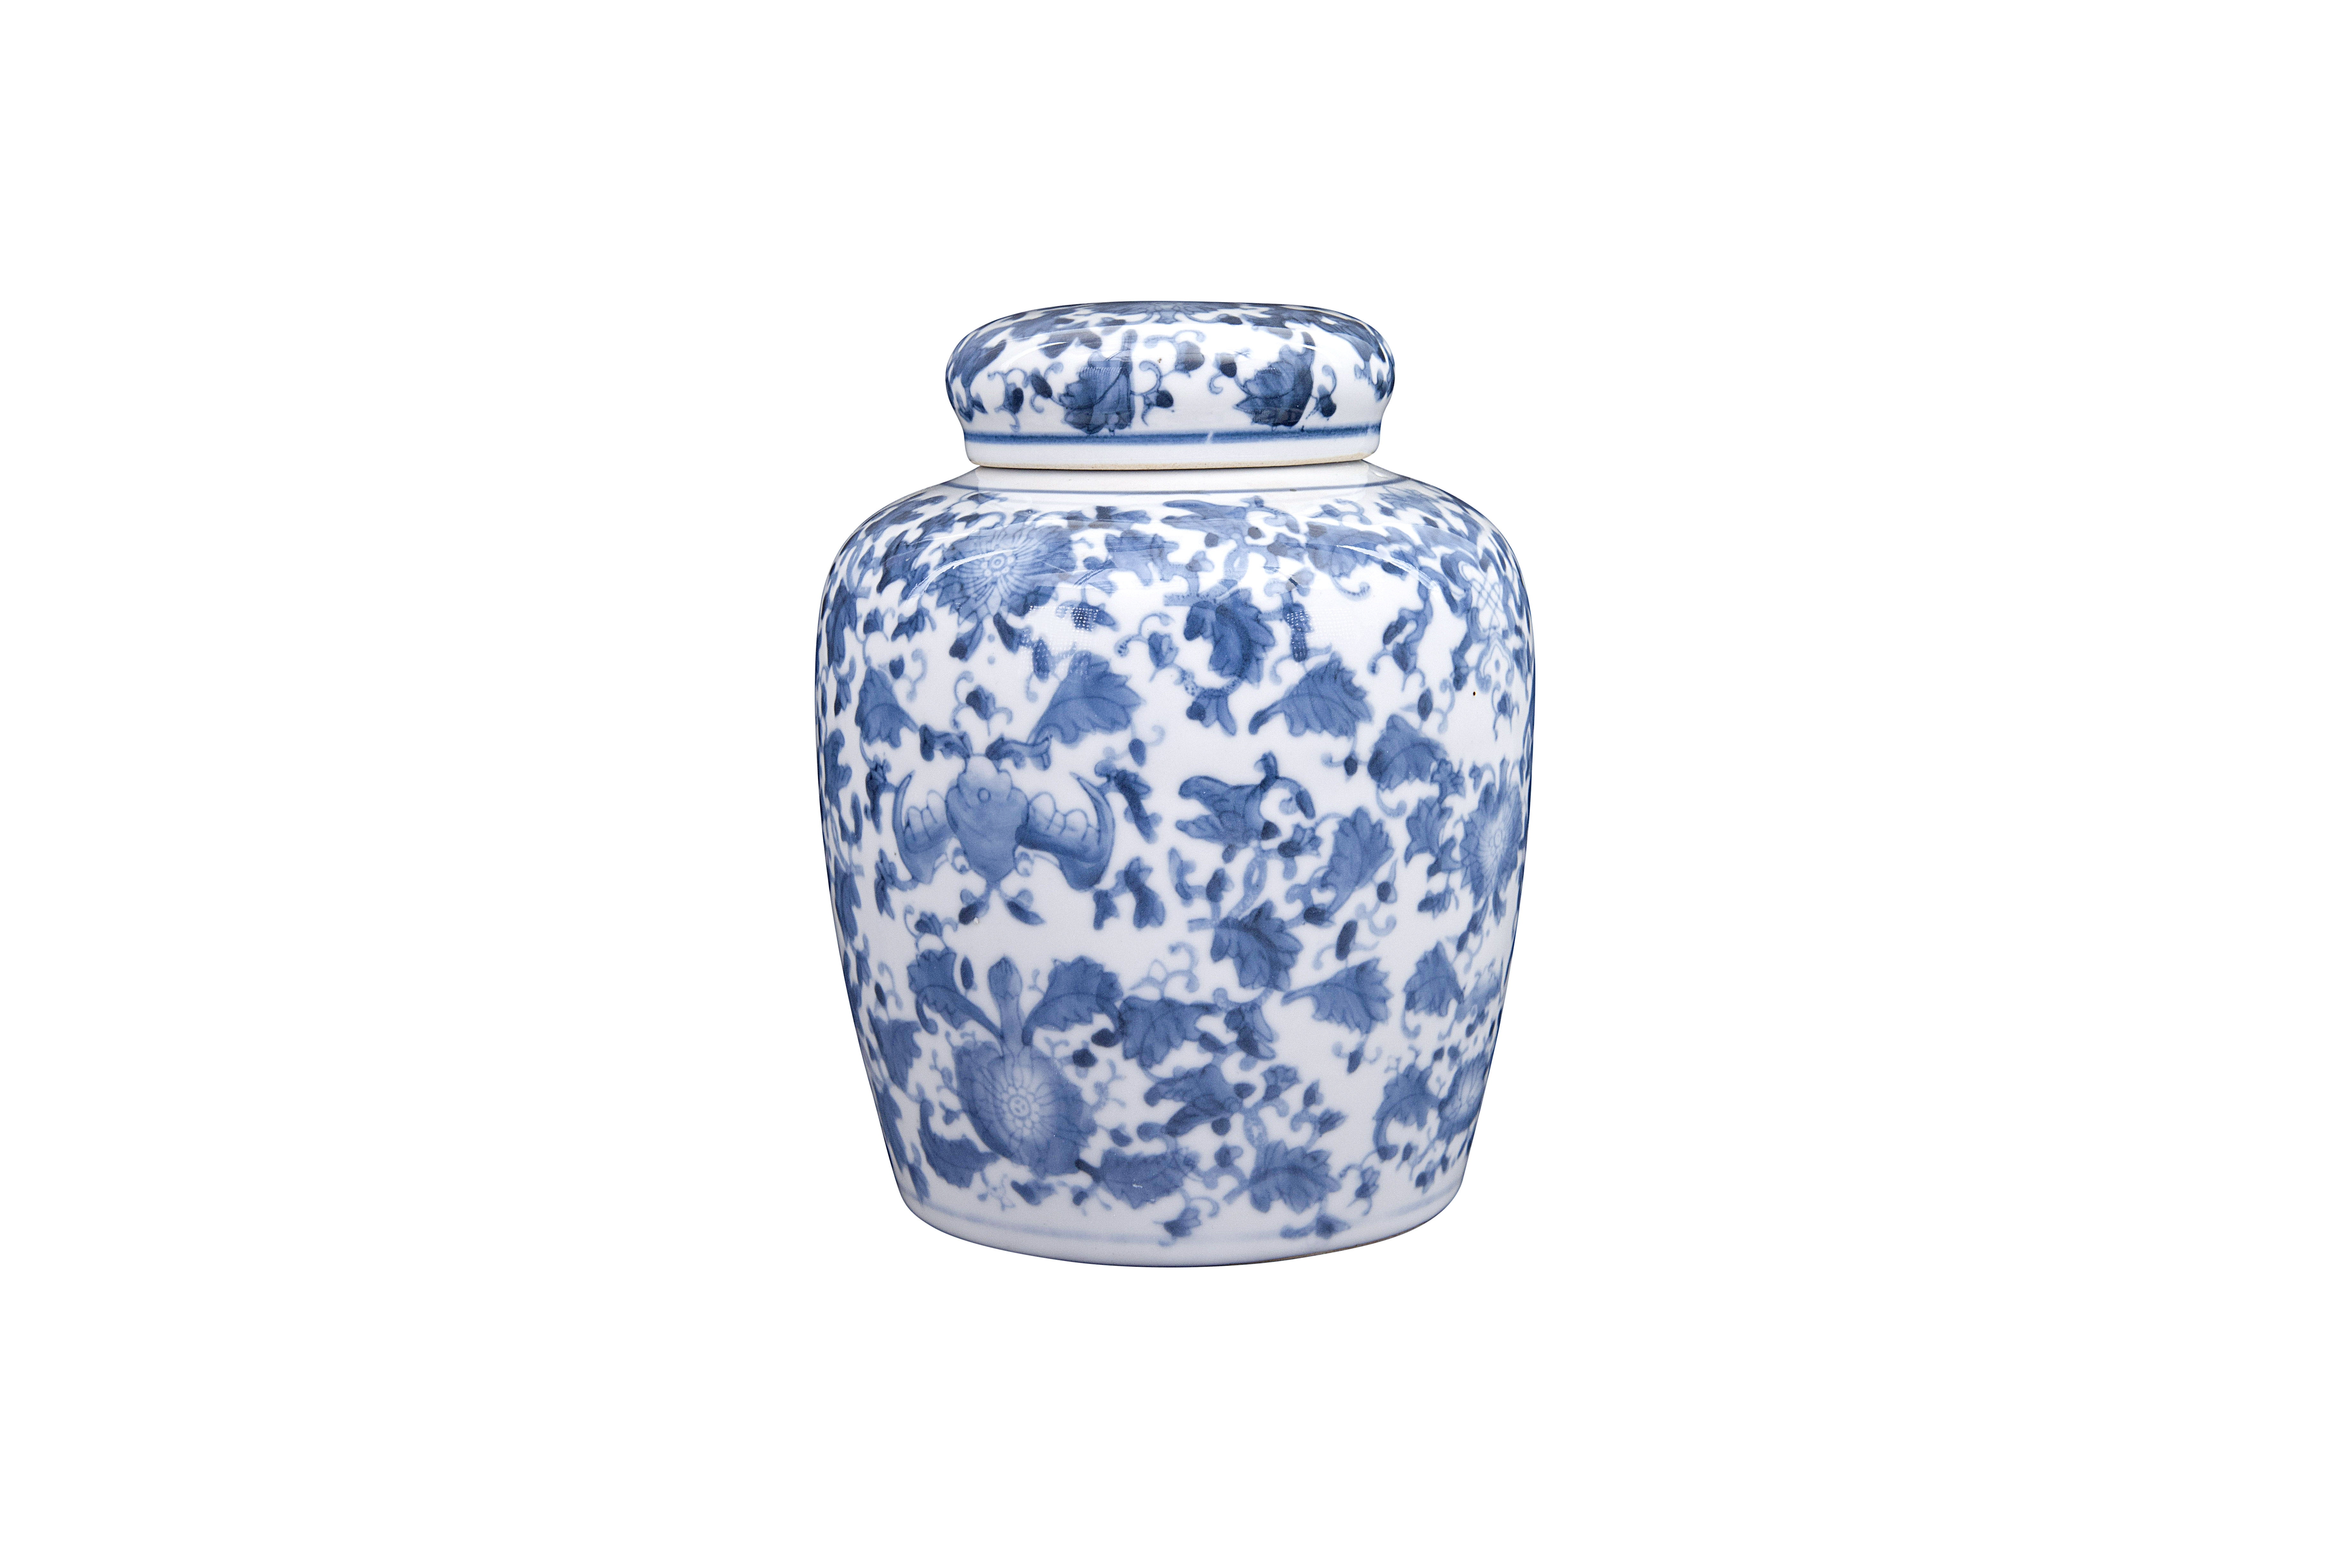 Decorative Blue and White Ceramic Ginger Jar with Lid - Image 0